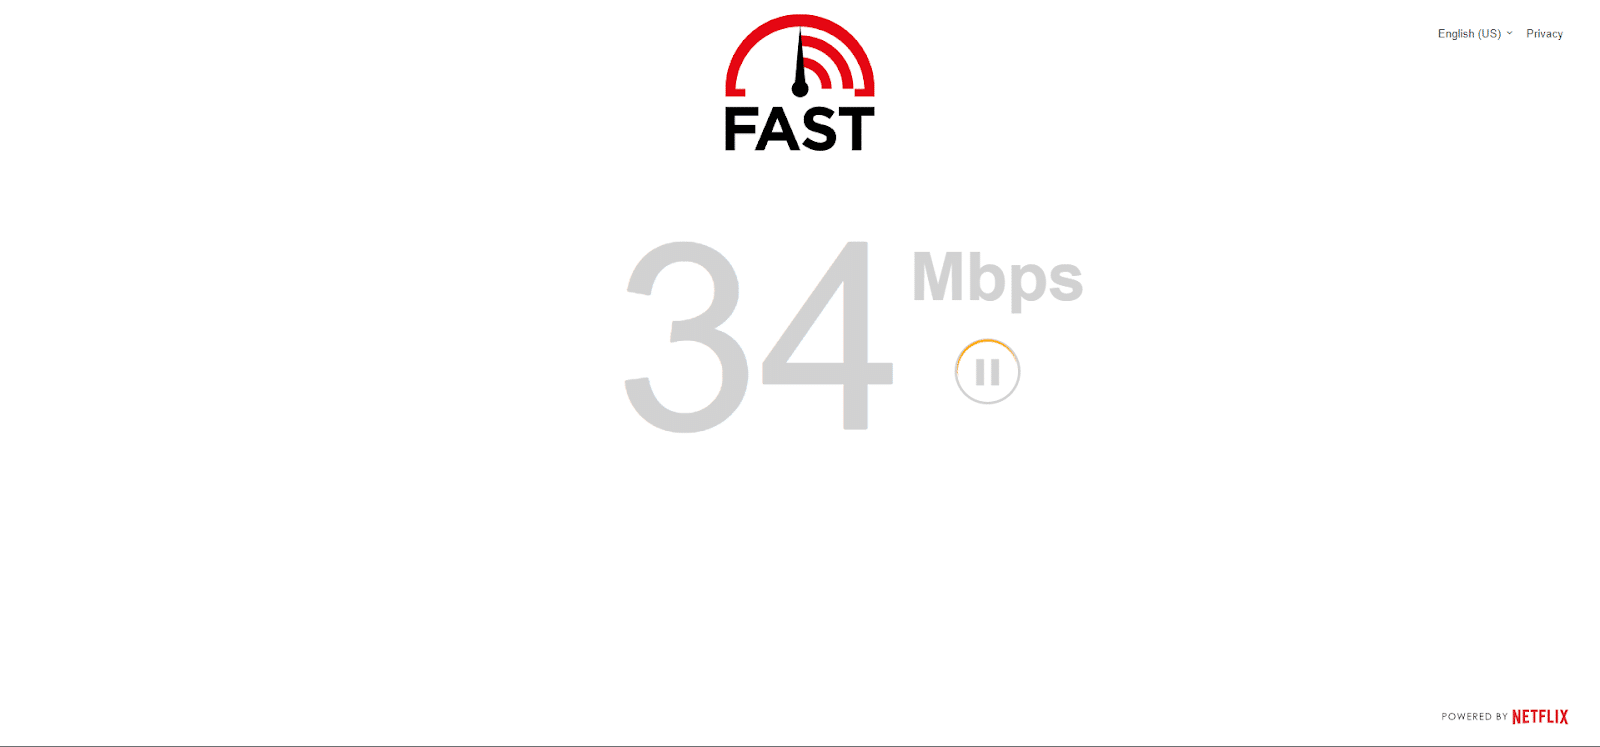 test internet connection speed at fast.com to fix Disney Plus (Disney+) no sound or audio not working or playing